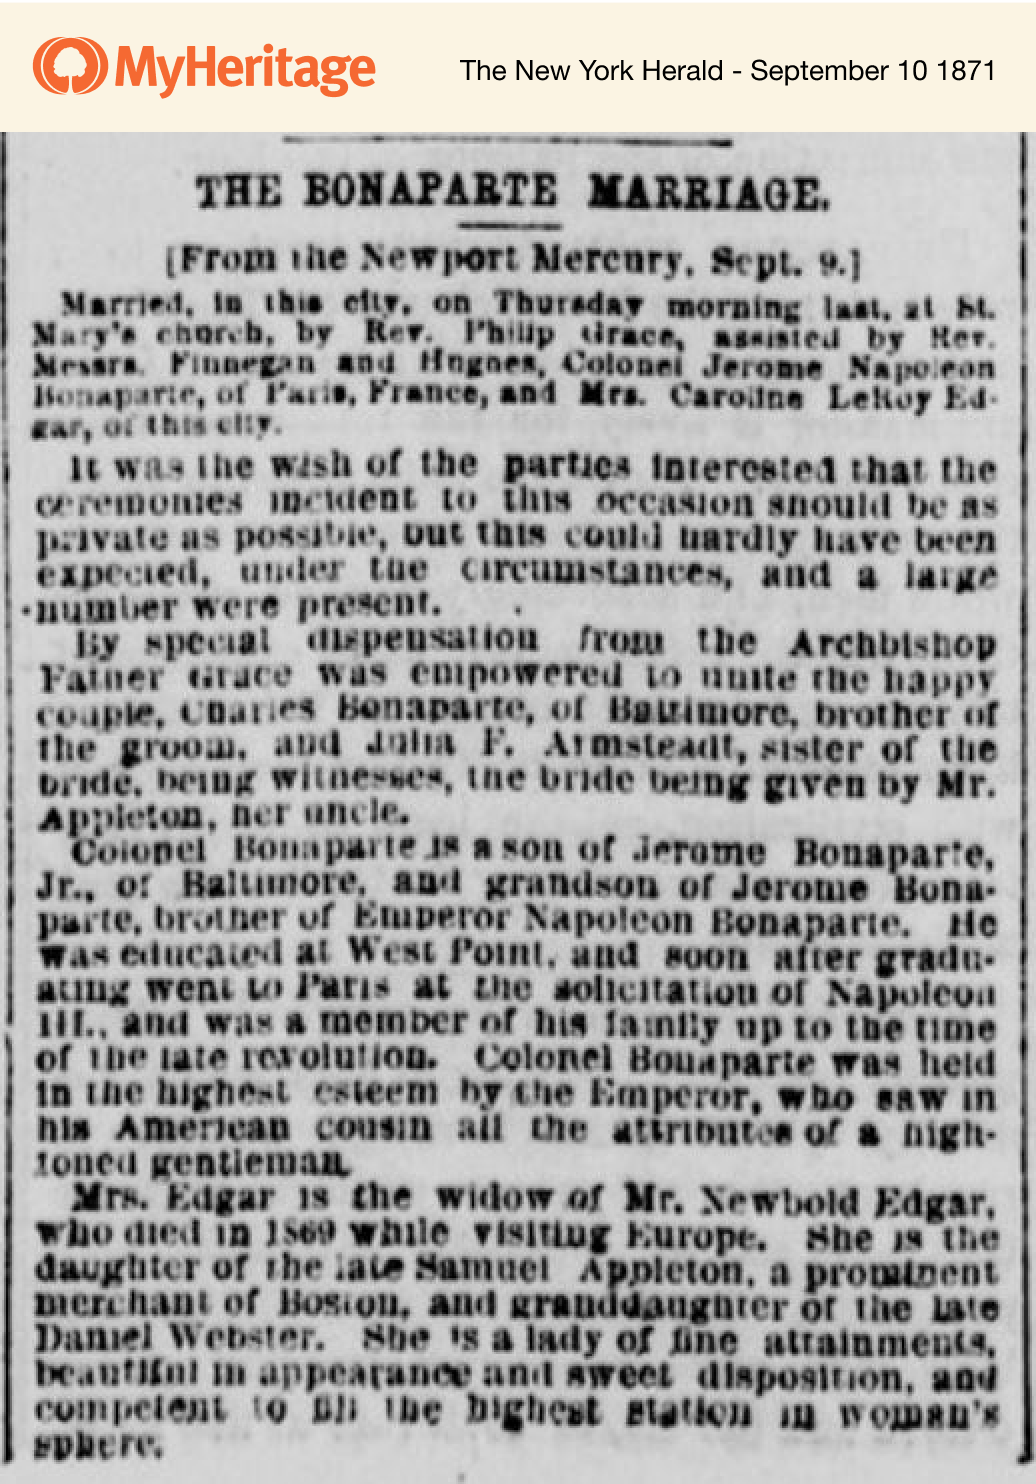 Announcement of the 1871 marriage of Jerome Bonaparte and Caroline Appleton. MyHeritage historical record collections.